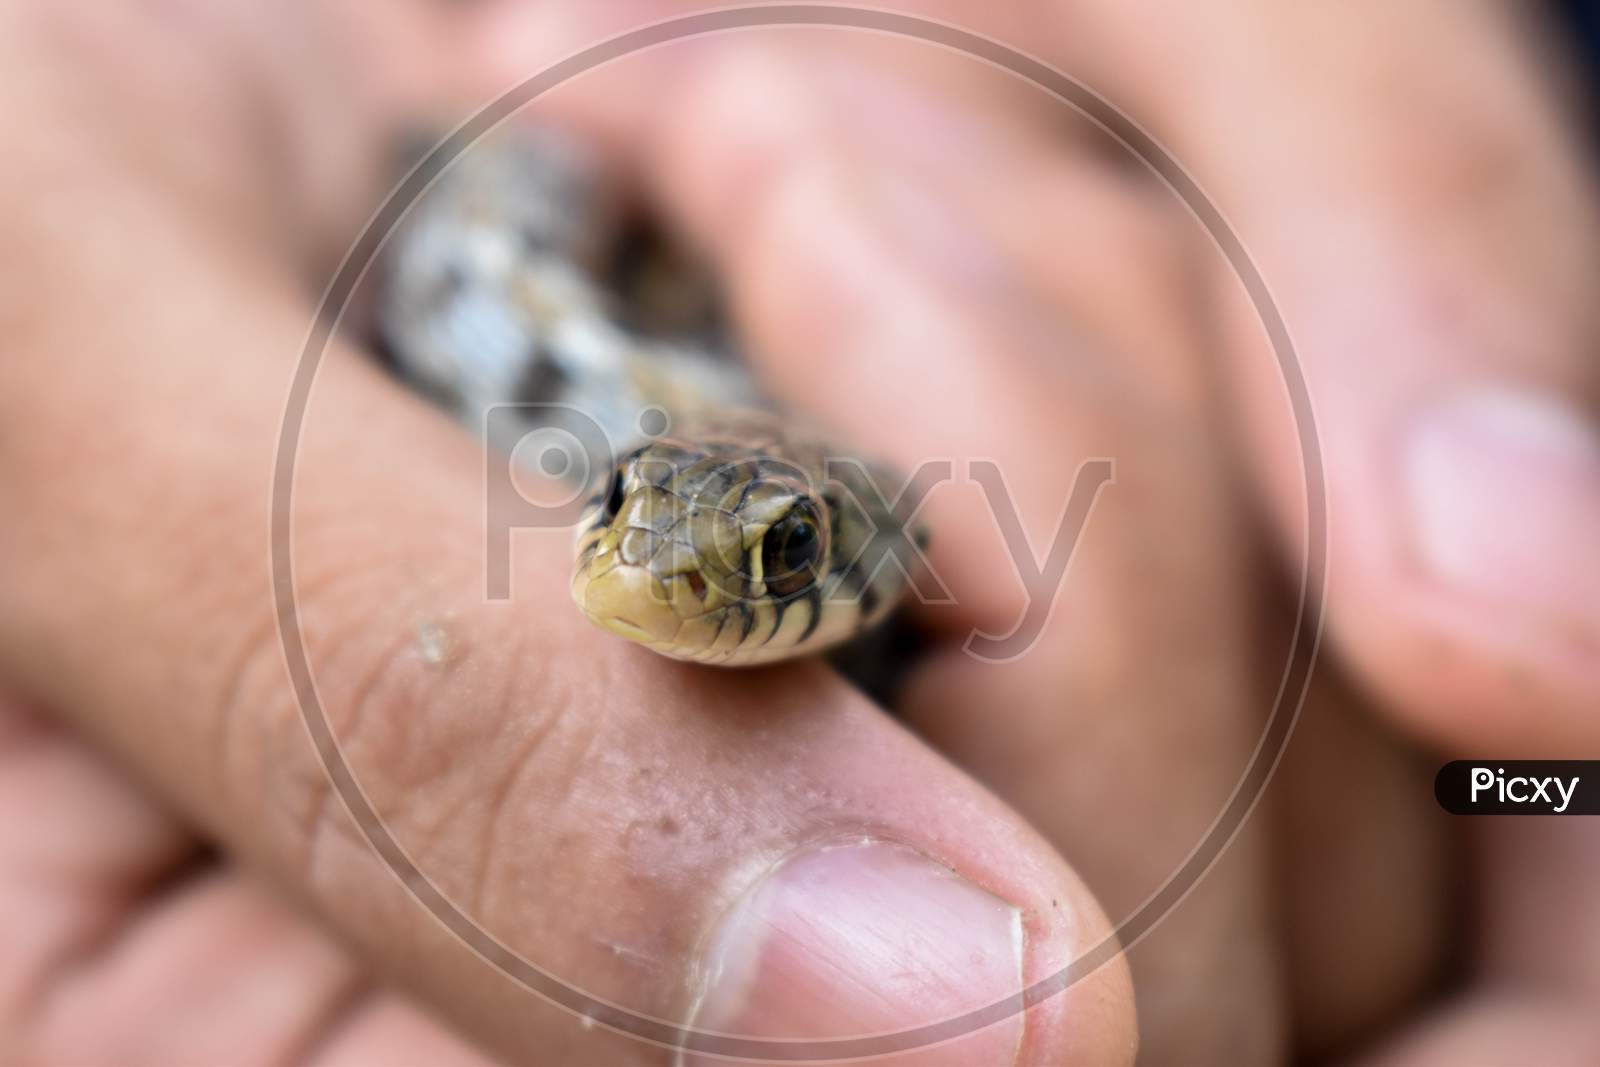 A MAN IS HOLDING A SNAKE IN HIS HAND